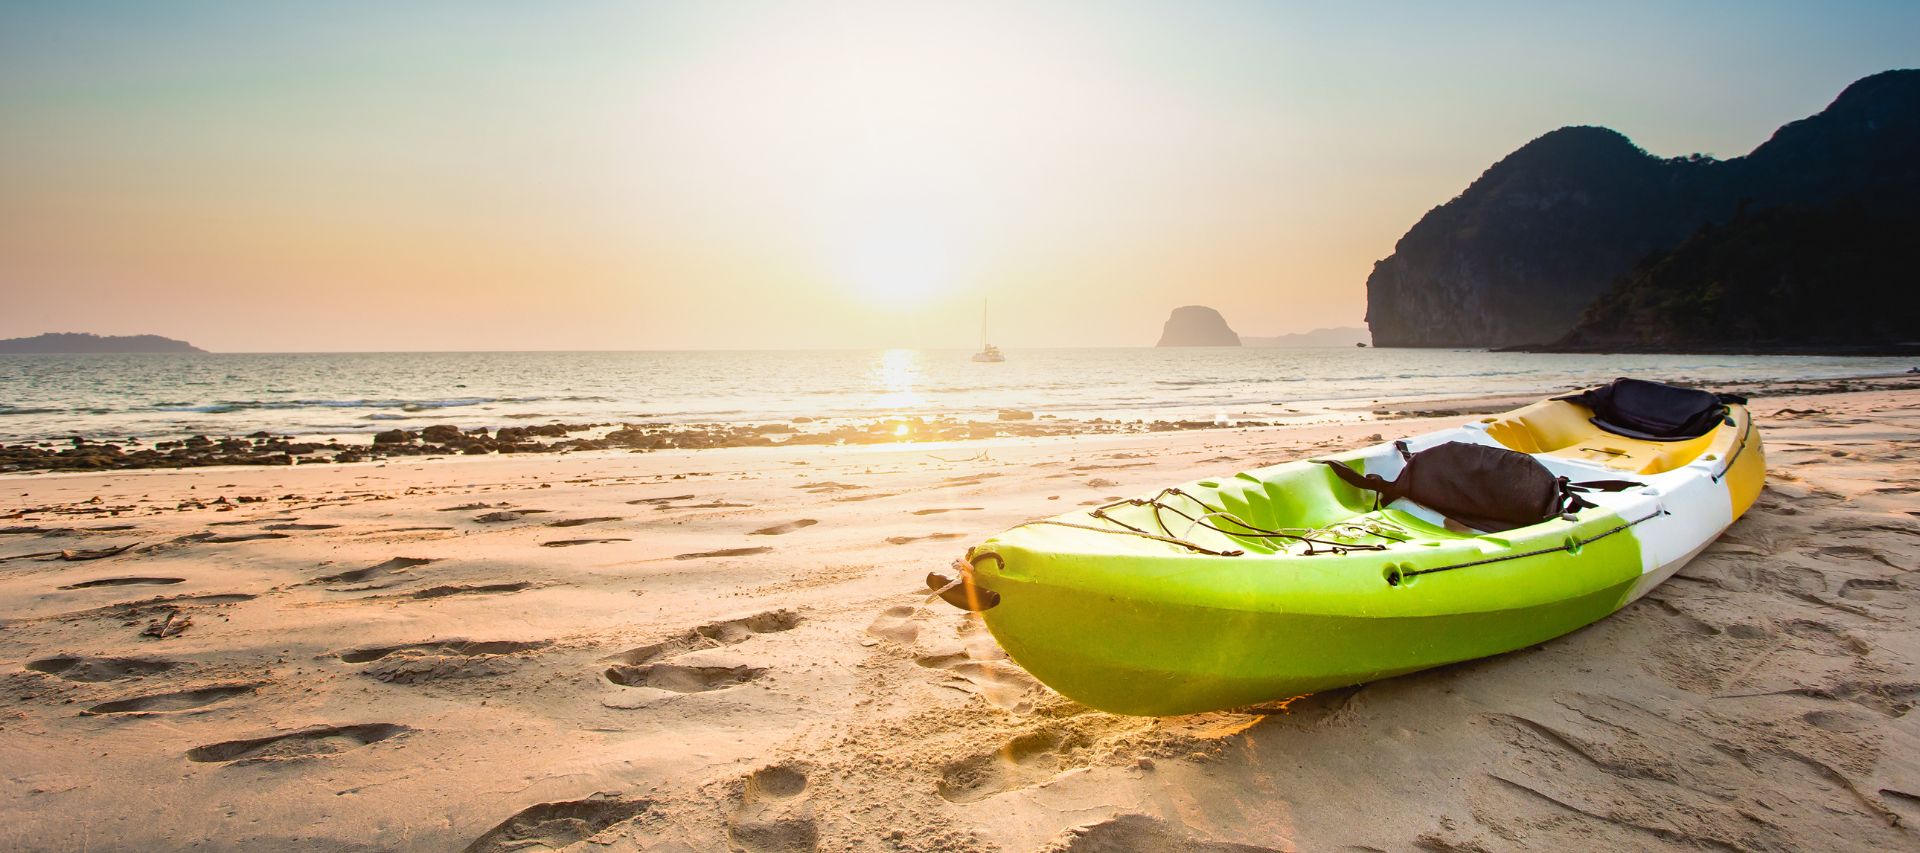 A tri-colored kayak in light green, white and yellow lies on the beach against a beautiful sunset and mountain backdrop